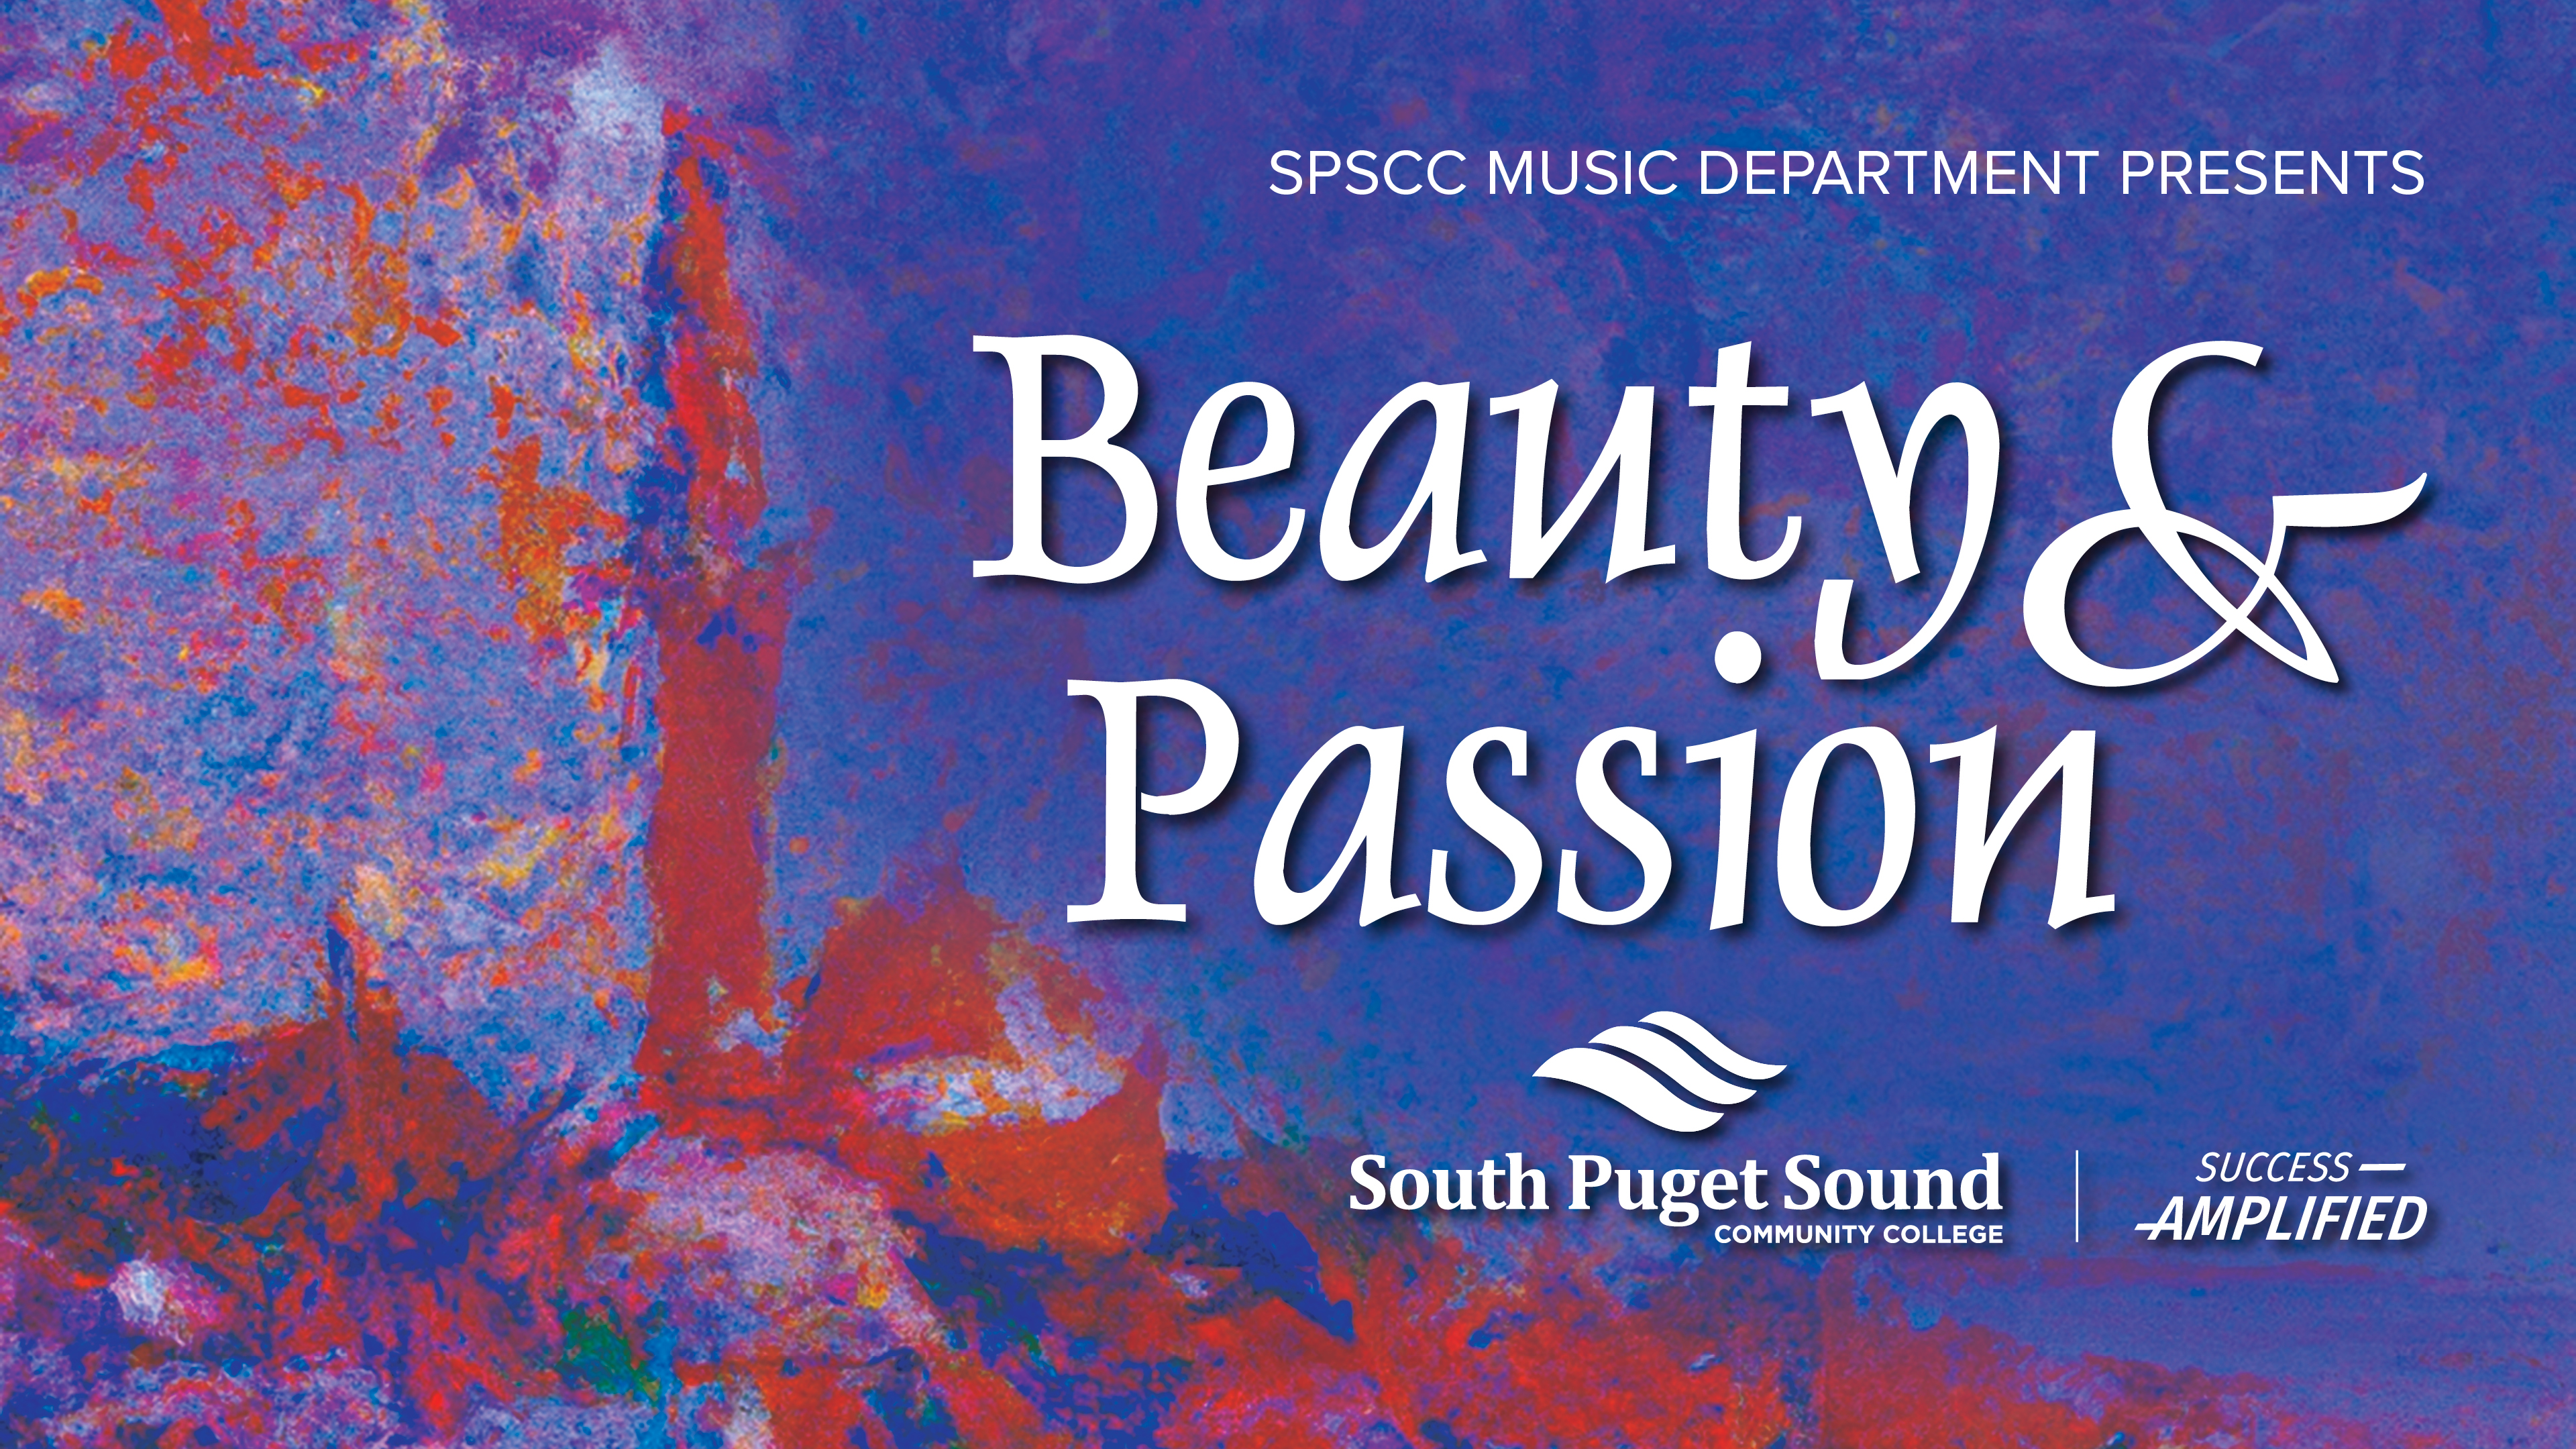 SPSCC Music Department presents Beauty & Passion. Saturday, March 16, 2024 at 7:30 p.m. Kenneth J. Minnaert Center for the Arts. Sponsored by R.L. Ray Violin Shop.